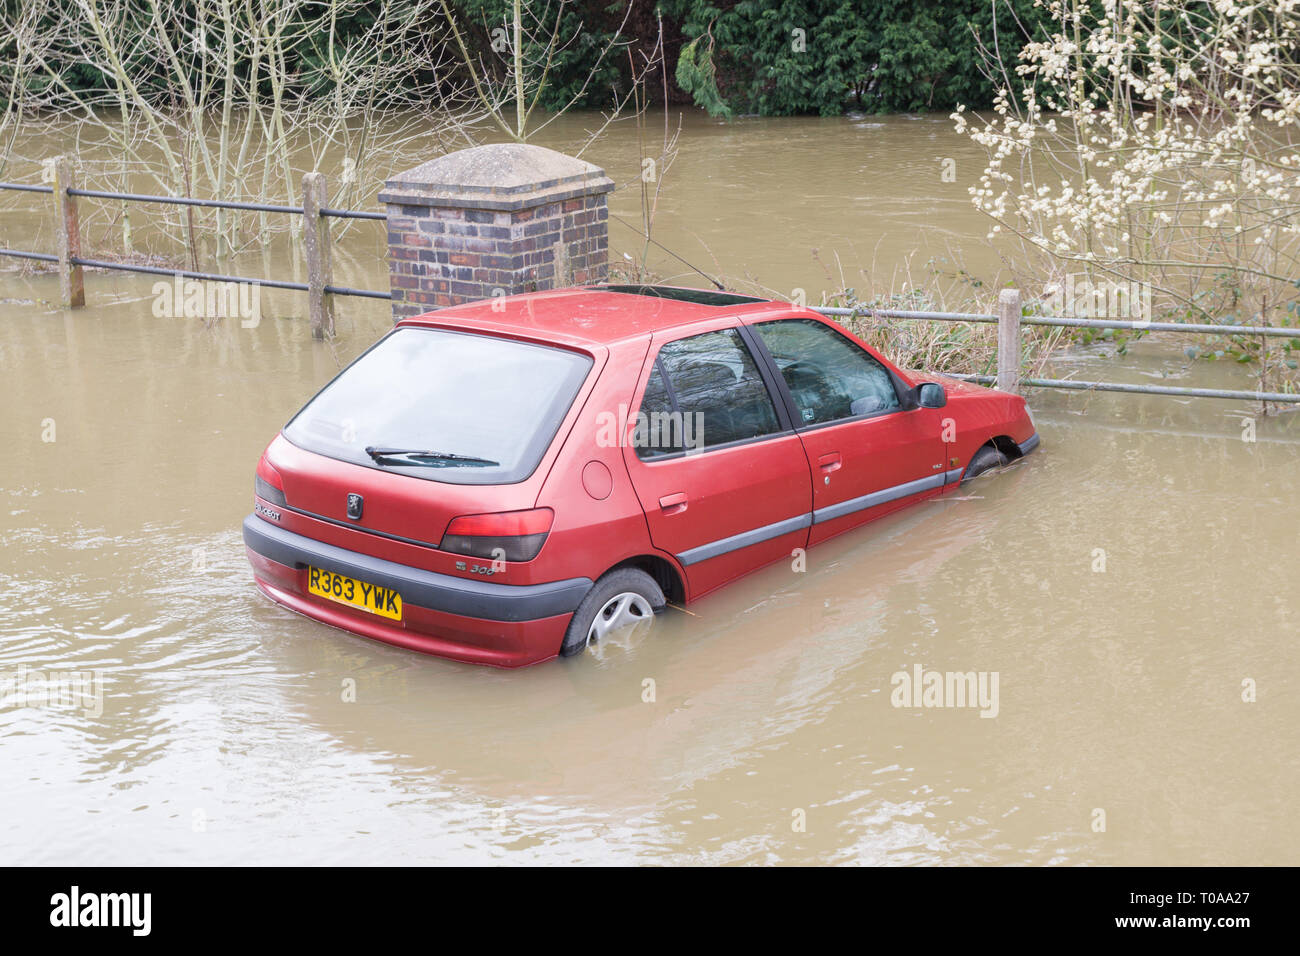 Bridgnorth, Shropshire, UK. 19th March, 2019. A car is stuck in the River Severn floodwater in Bridgnorth town. Peter Lopeman/Alamy Live News Stock Photo